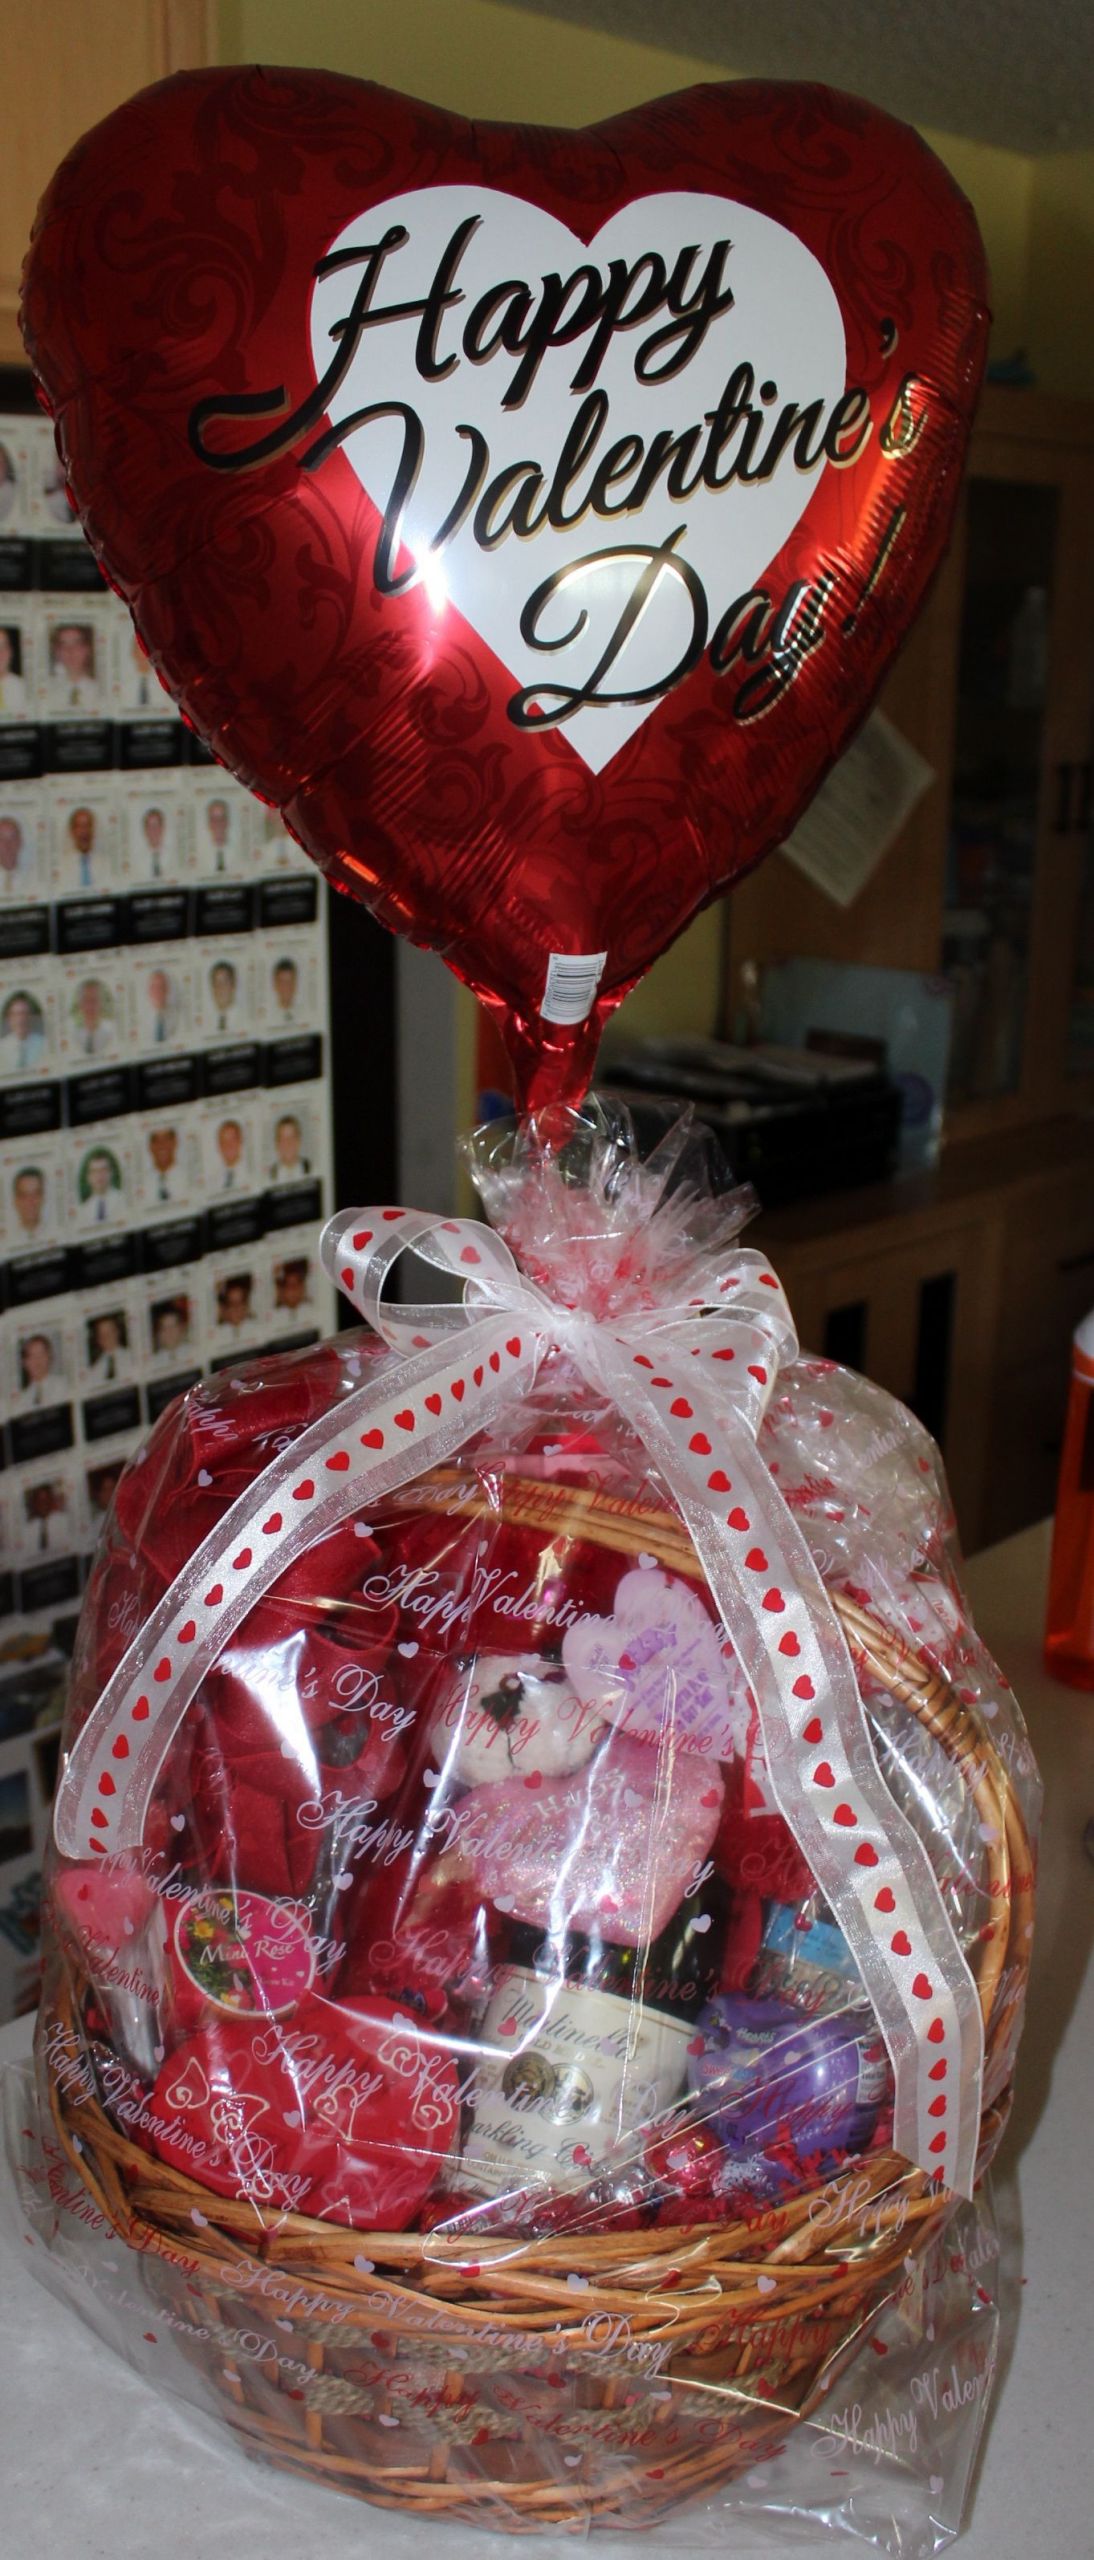 Female Valentine Gift Ideas
 47 How To Make A Valentine Gift Basket For Her Best Idea